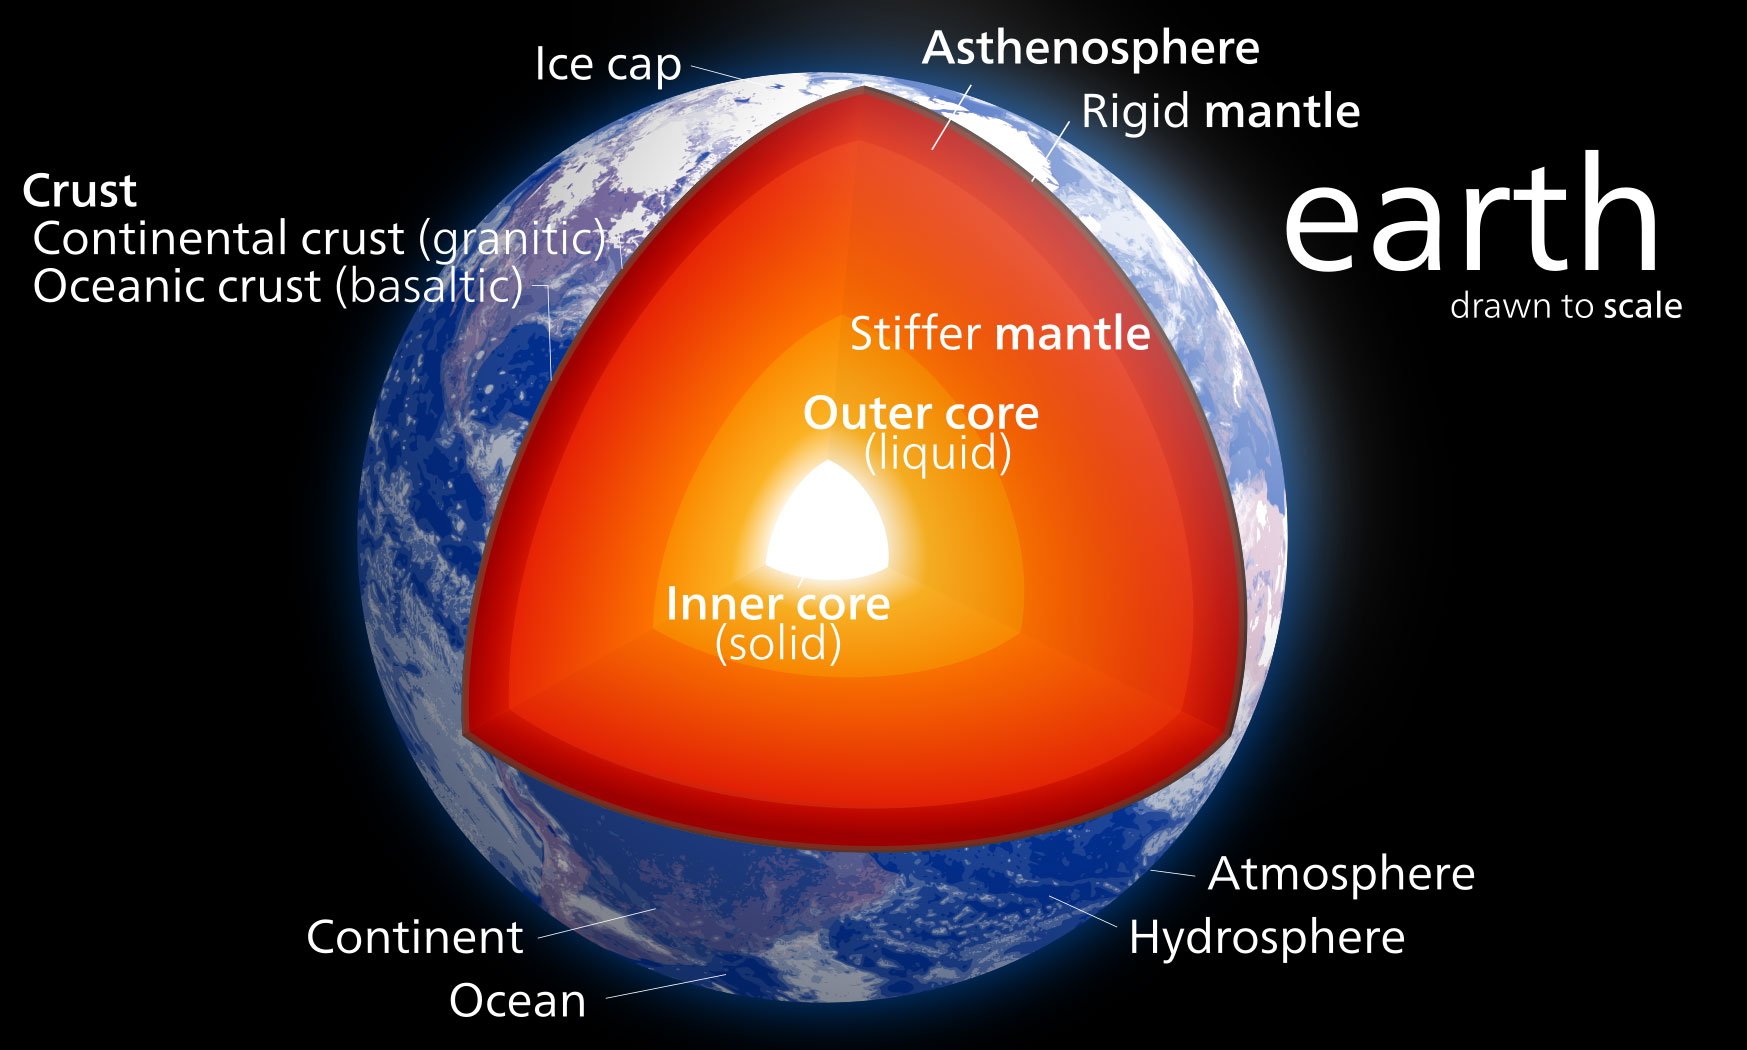 The inner and outer cores of the Earth are 80% iron.